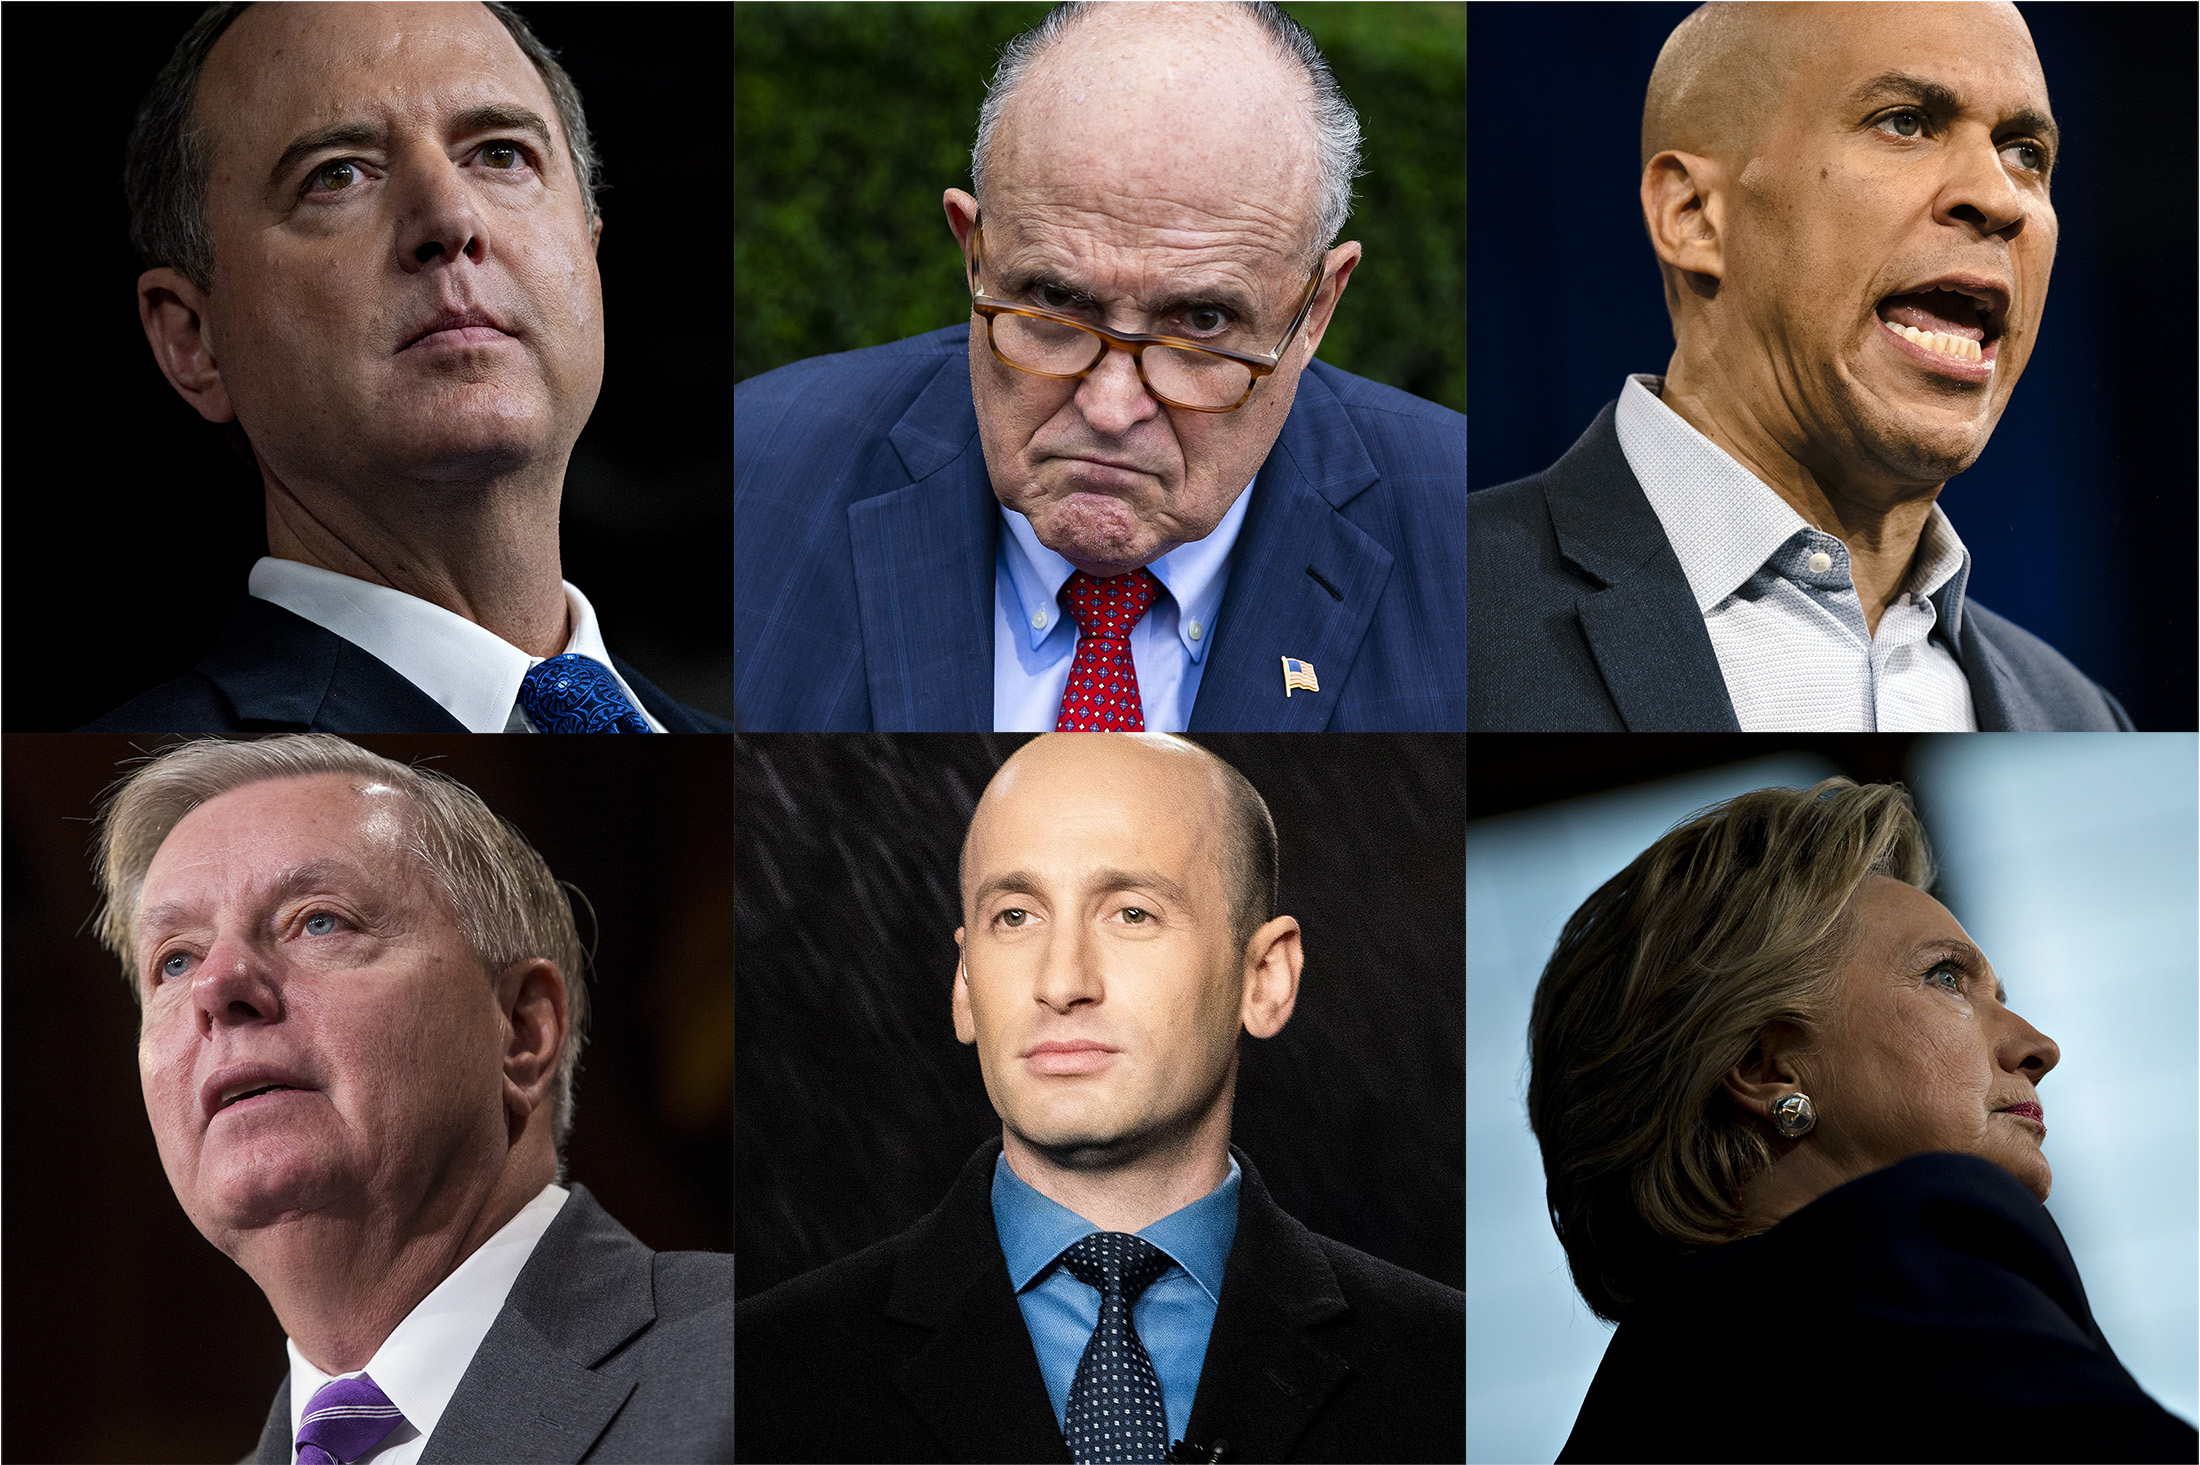 Adam Schiff, from top left clockwise, Rudy Giuliani, Cory Booker, Hillary Clinton, Stephen Miller, and Lindsey Graham